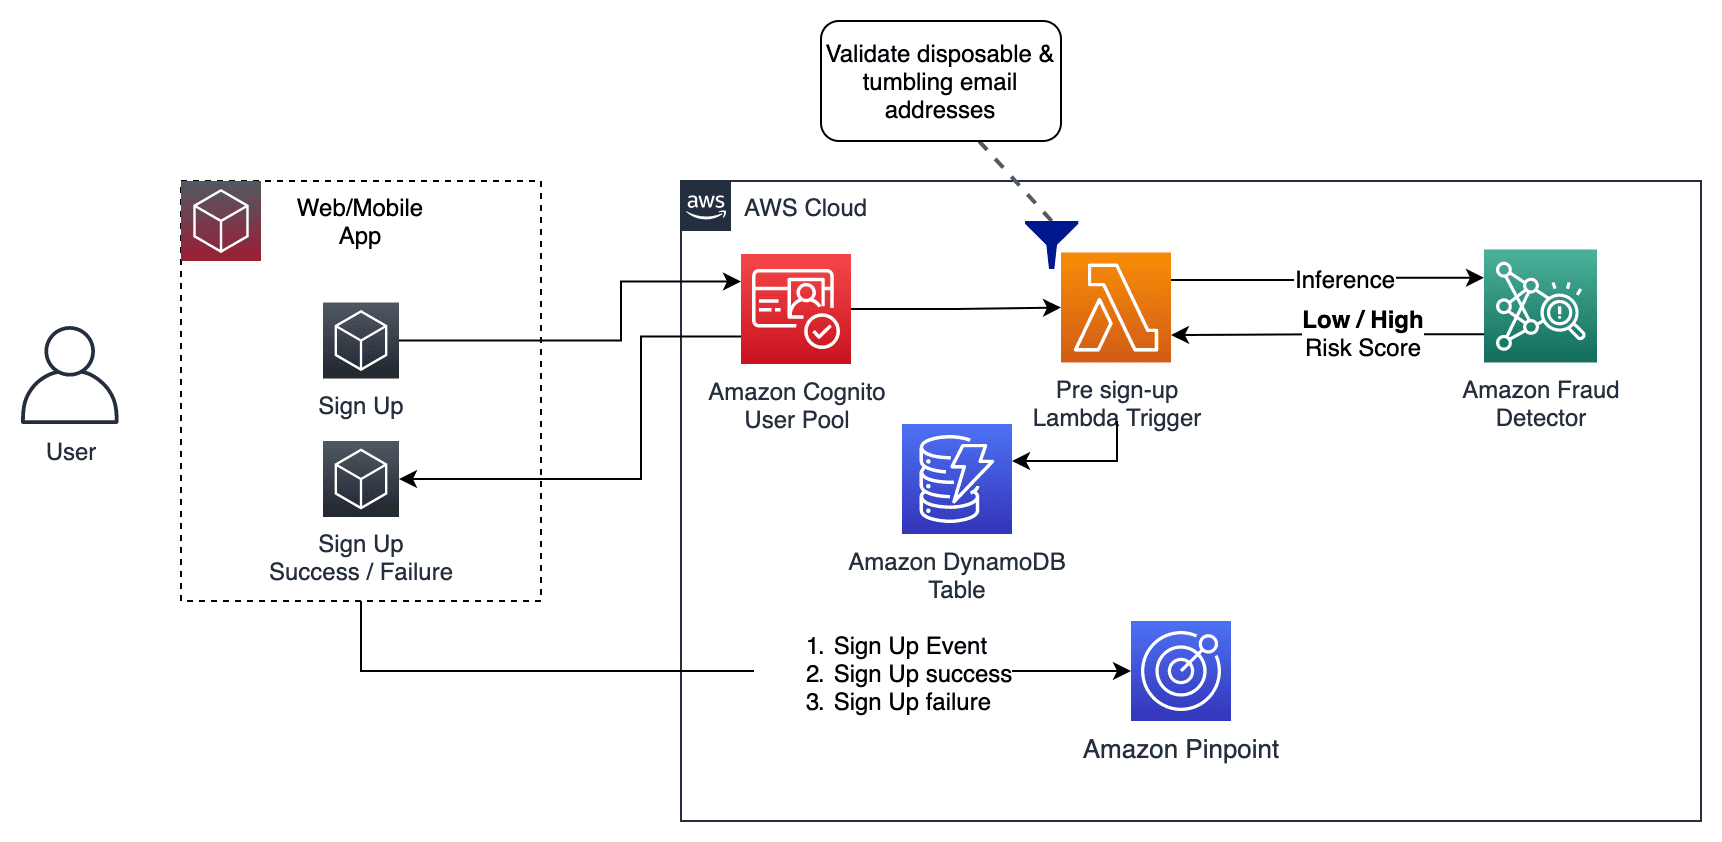 Registration flow architecture when low fraud risk or high fraud risk outcomes are detected by Amazon Fraud Detector, using Amazon Cognito and a pre sign up AWS Lambda function